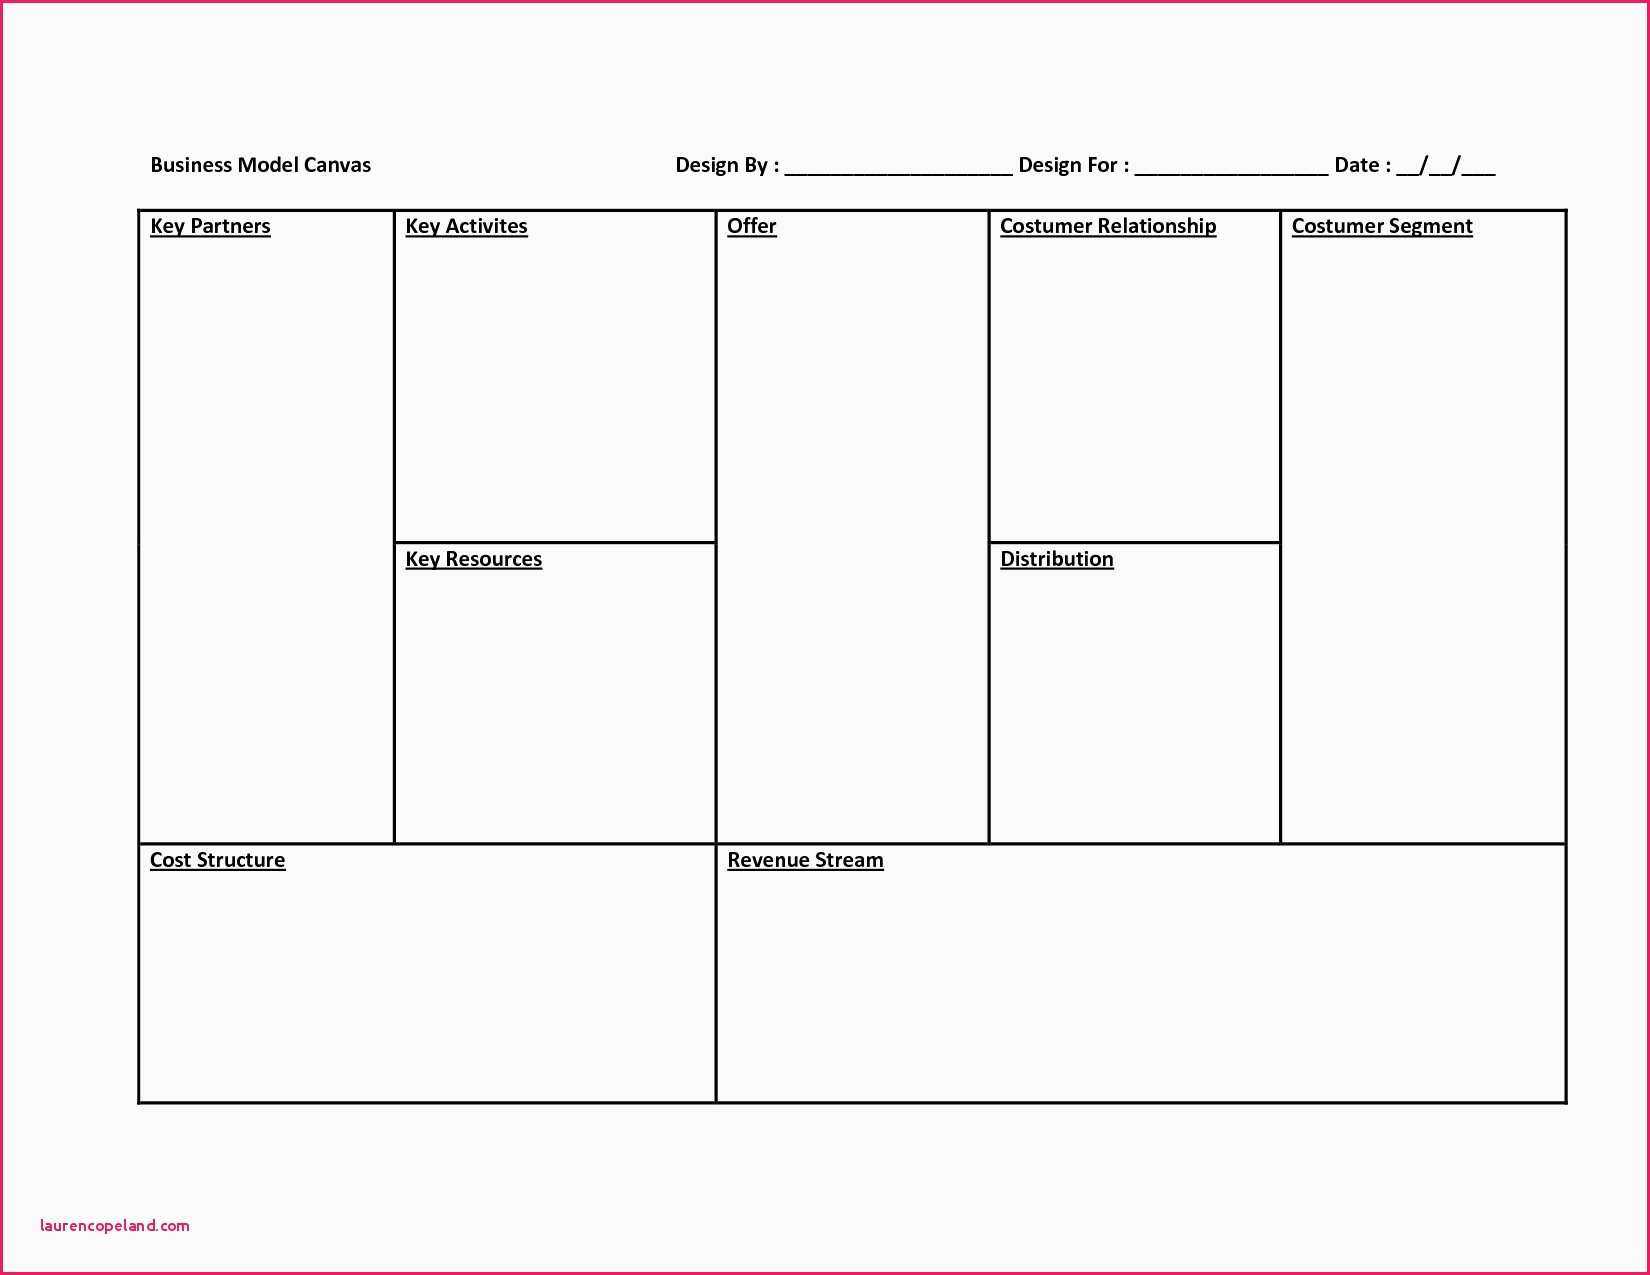 Business Model Canvas Template Word – Atlantaauctionco Throughout Business Model Canvas Template Word